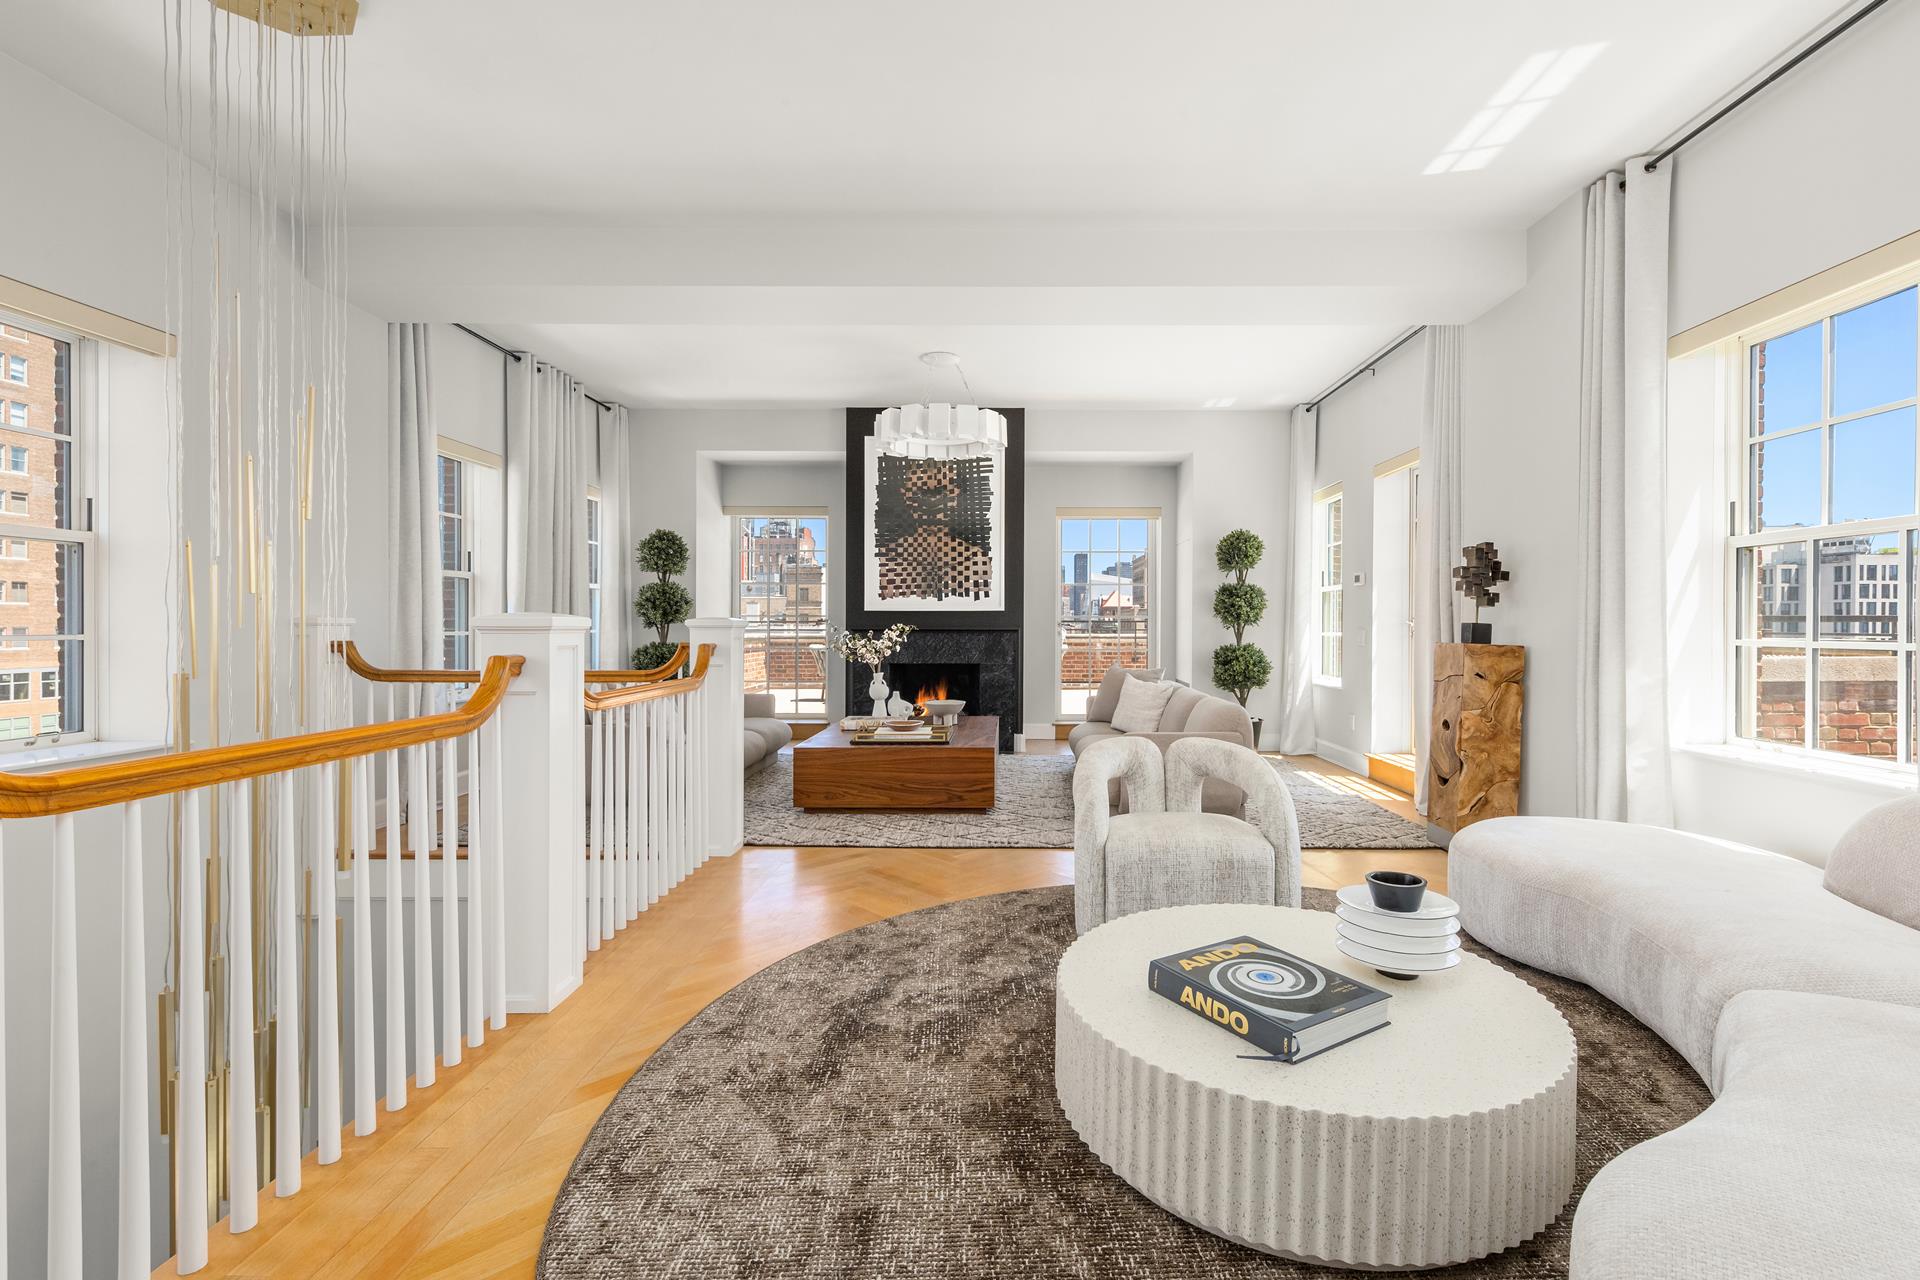 18 Gramercy Park Penthouse, Gramercy Park, Downtown, NYC - 5 Bedrooms  
5.5 Bathrooms  
14 Rooms - 